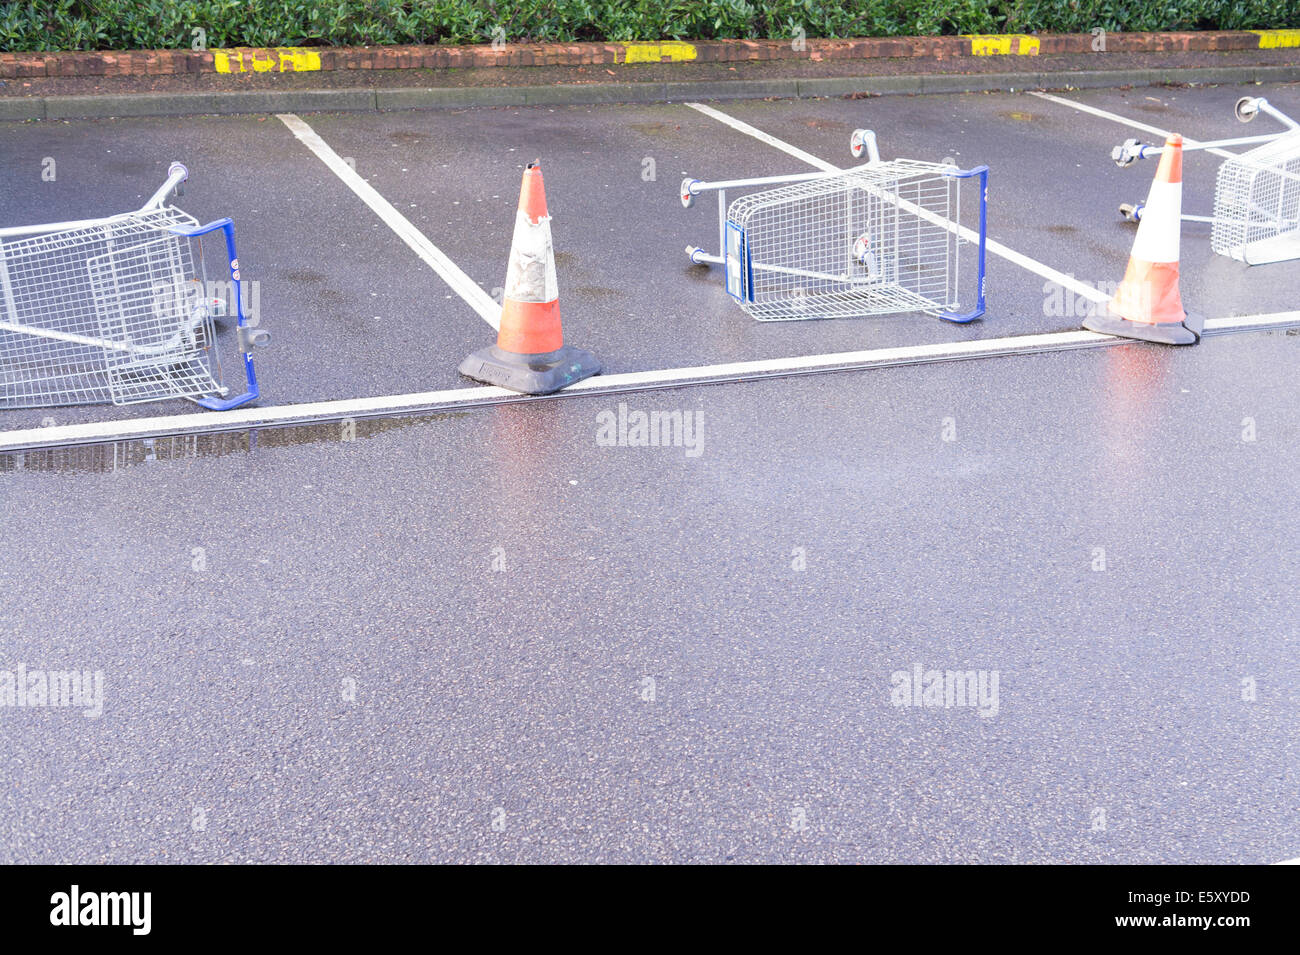 Out of use car parking spaces blocked with overturned shopping trolleys. Stock Photo